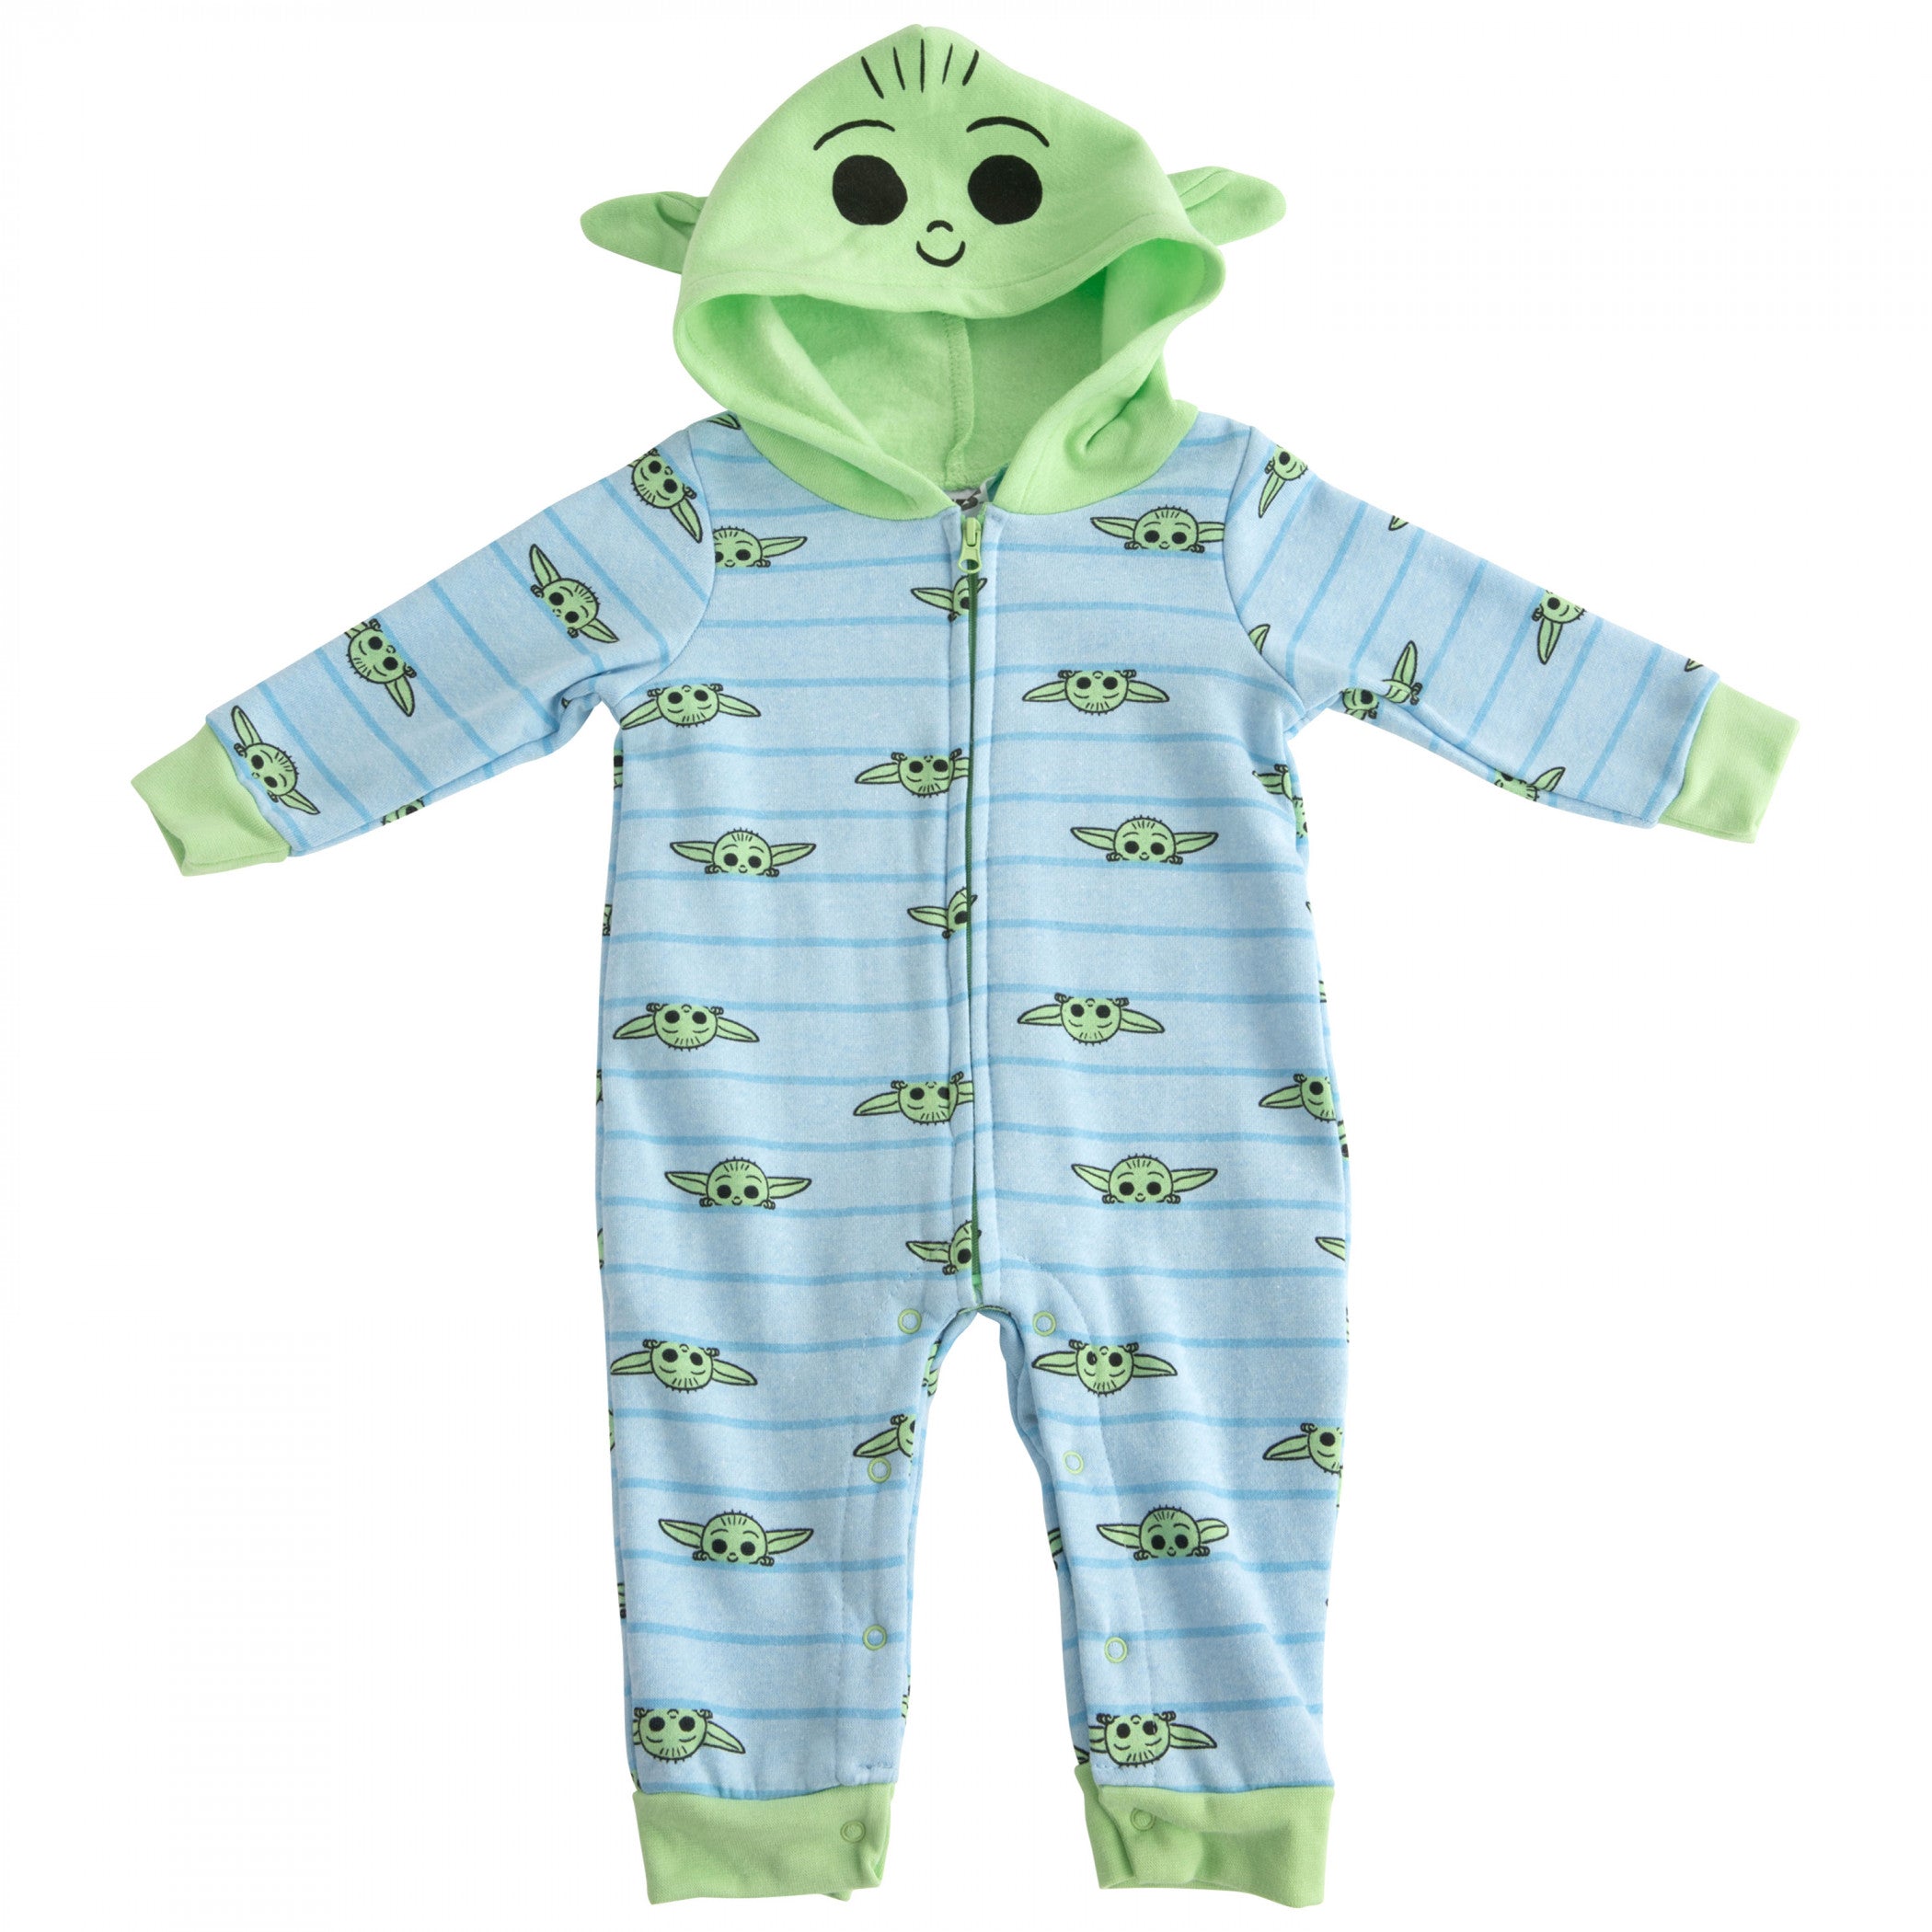 title:Star Wars Grogu Infant Hooded Fleece Coveralls with Ears;color:Multi-Color